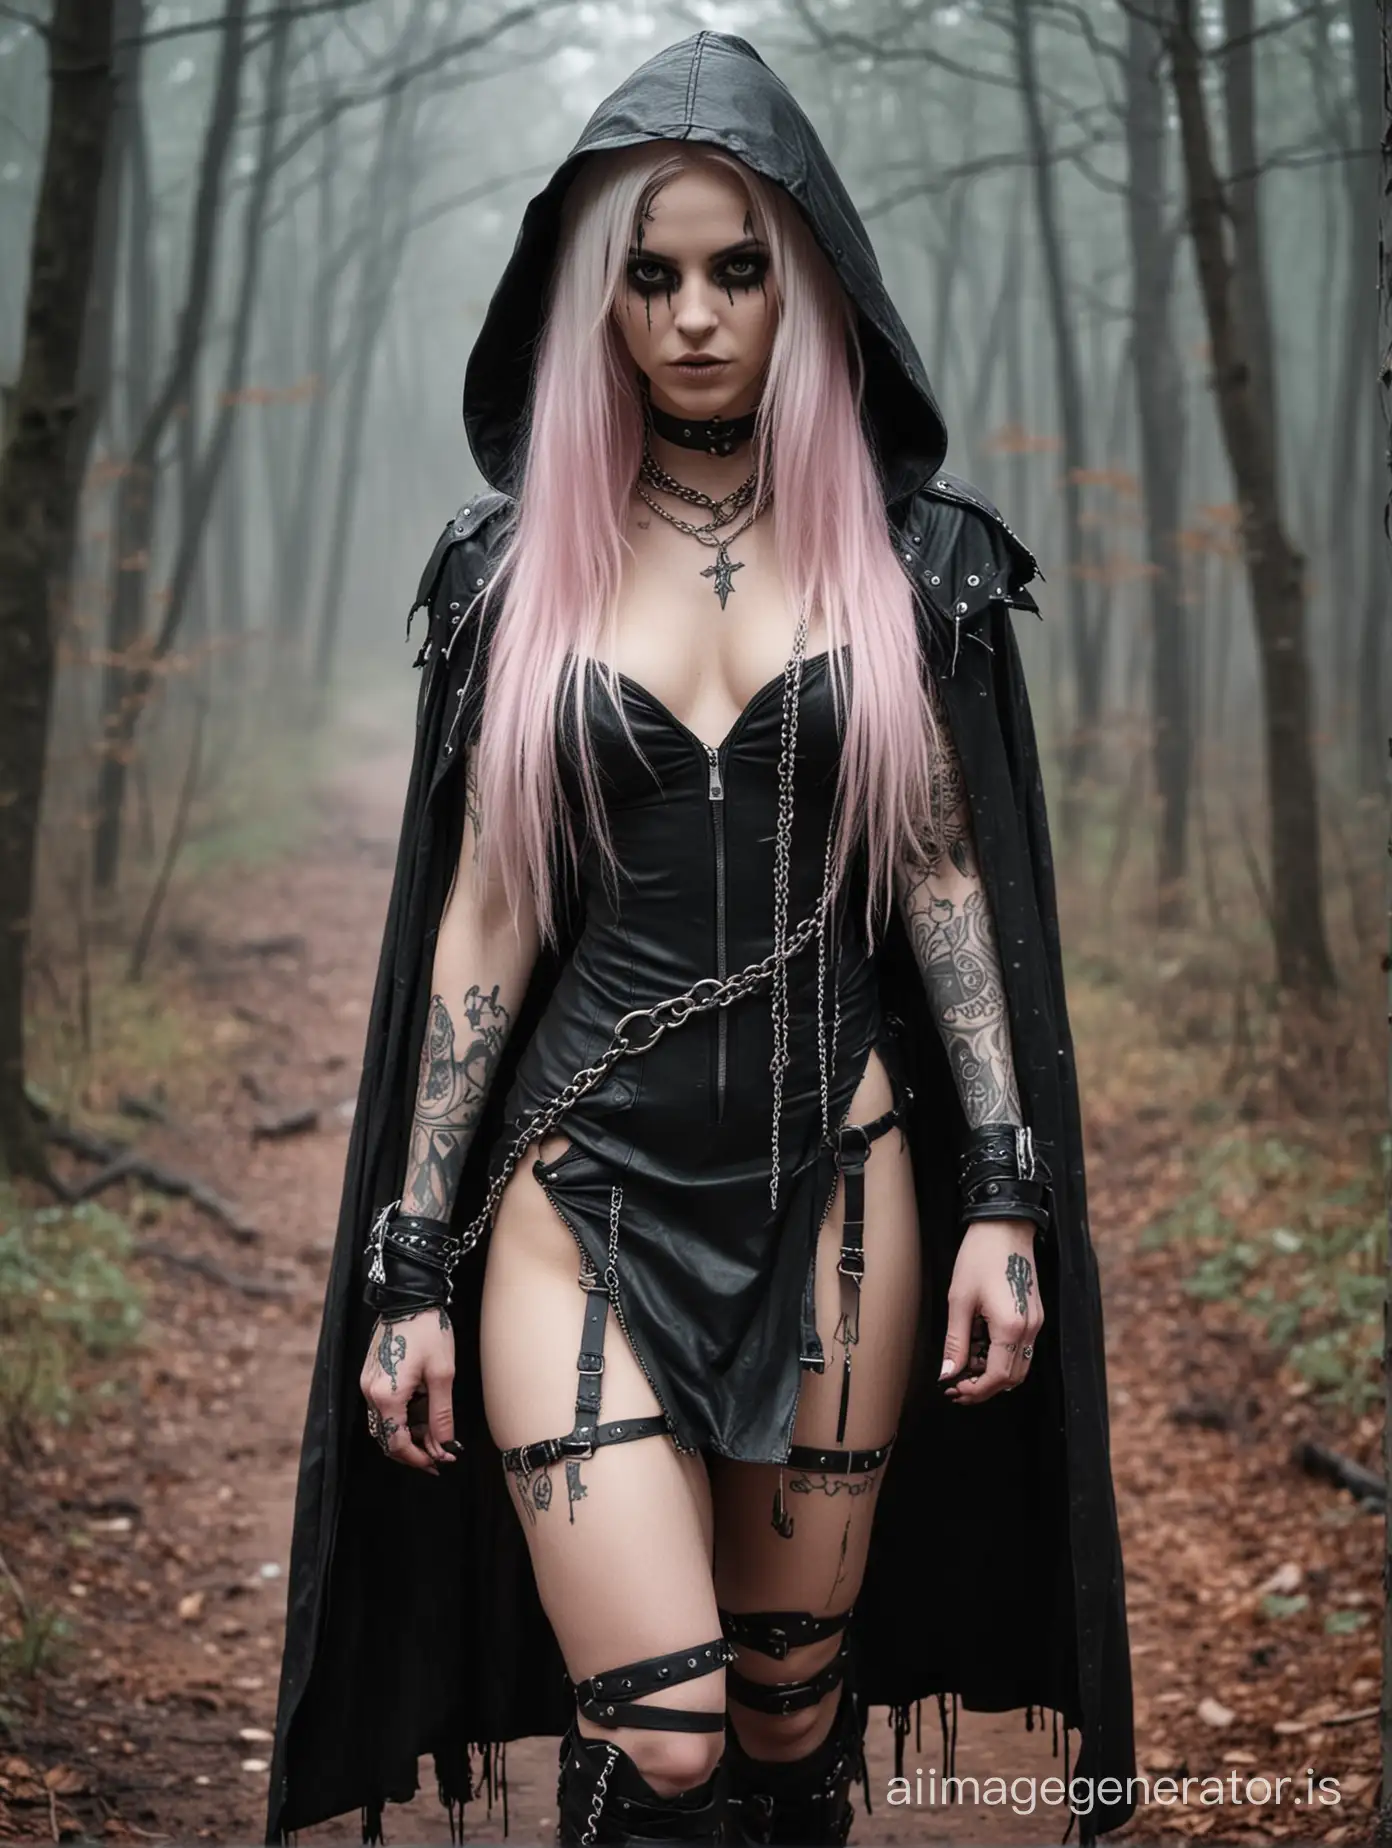 Young spooky skinny goth girl with a torn, ripped up and dirty pink dress. some spiked leather straps and a hooded cape. Very long white hair. dark black running eye makeup. holding chain blade and a stuffed doll. tattoos and scars. foggy forest in the background